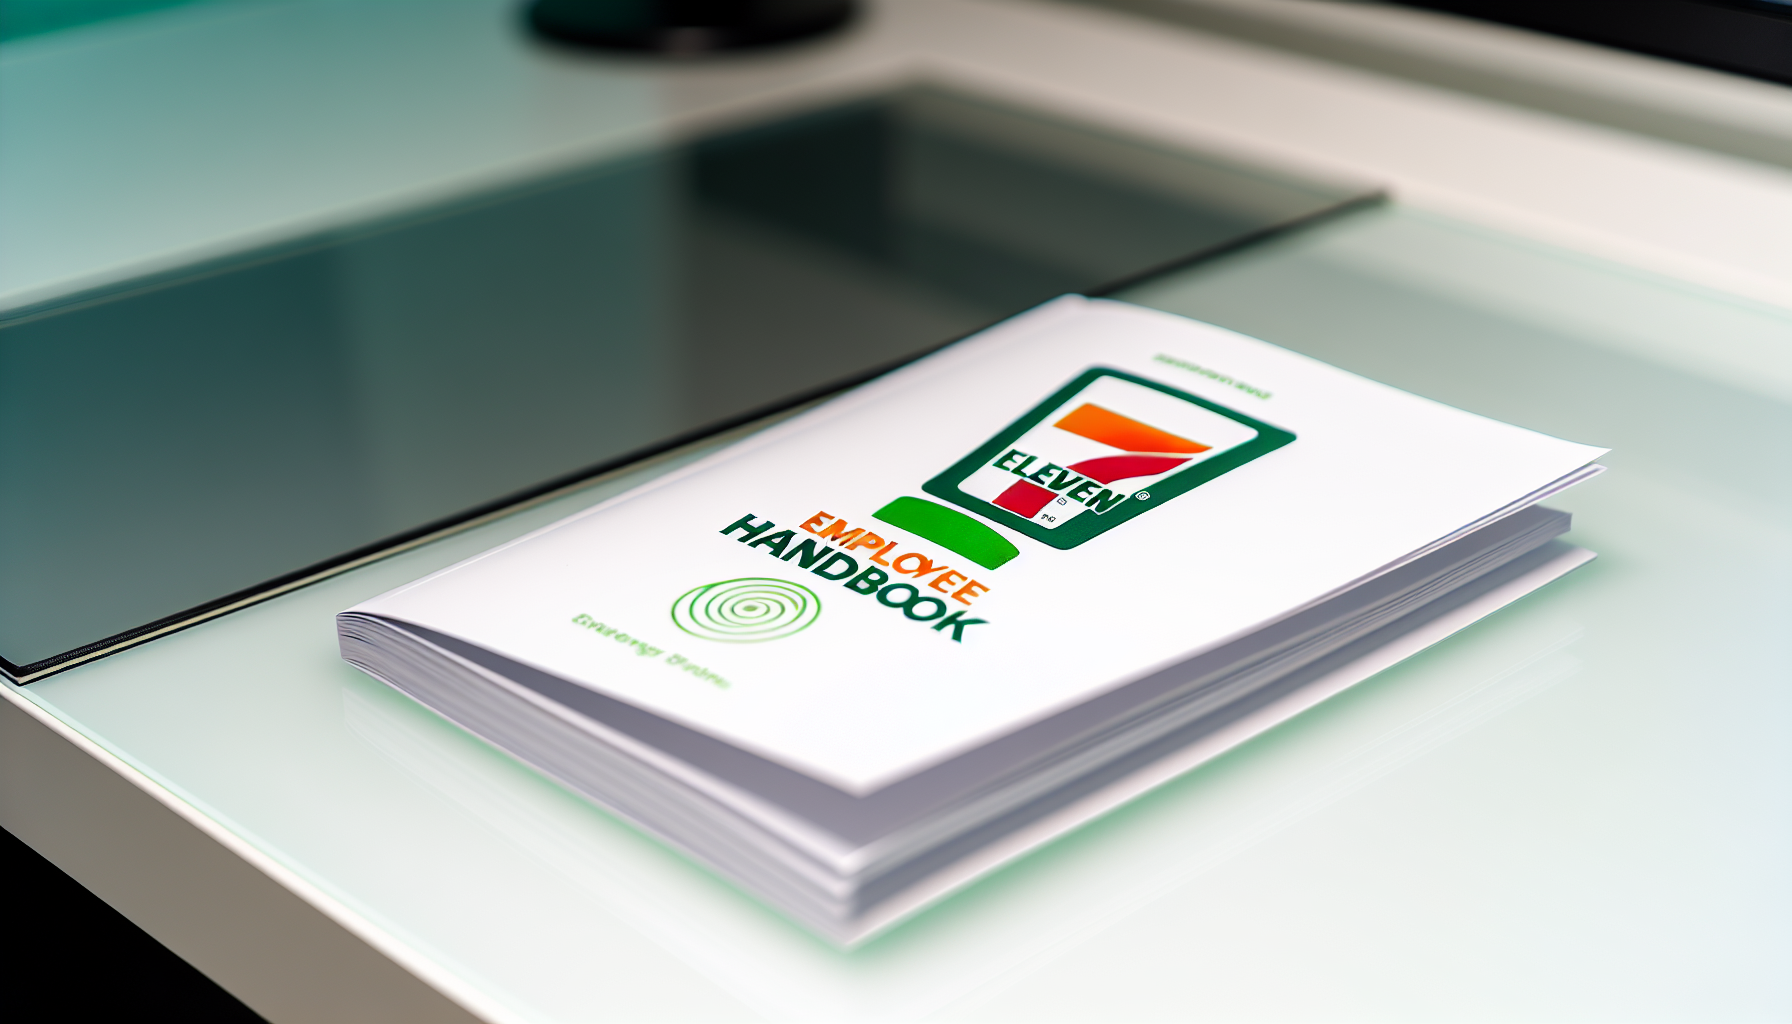 7-Eleven Employee Handbook cover page